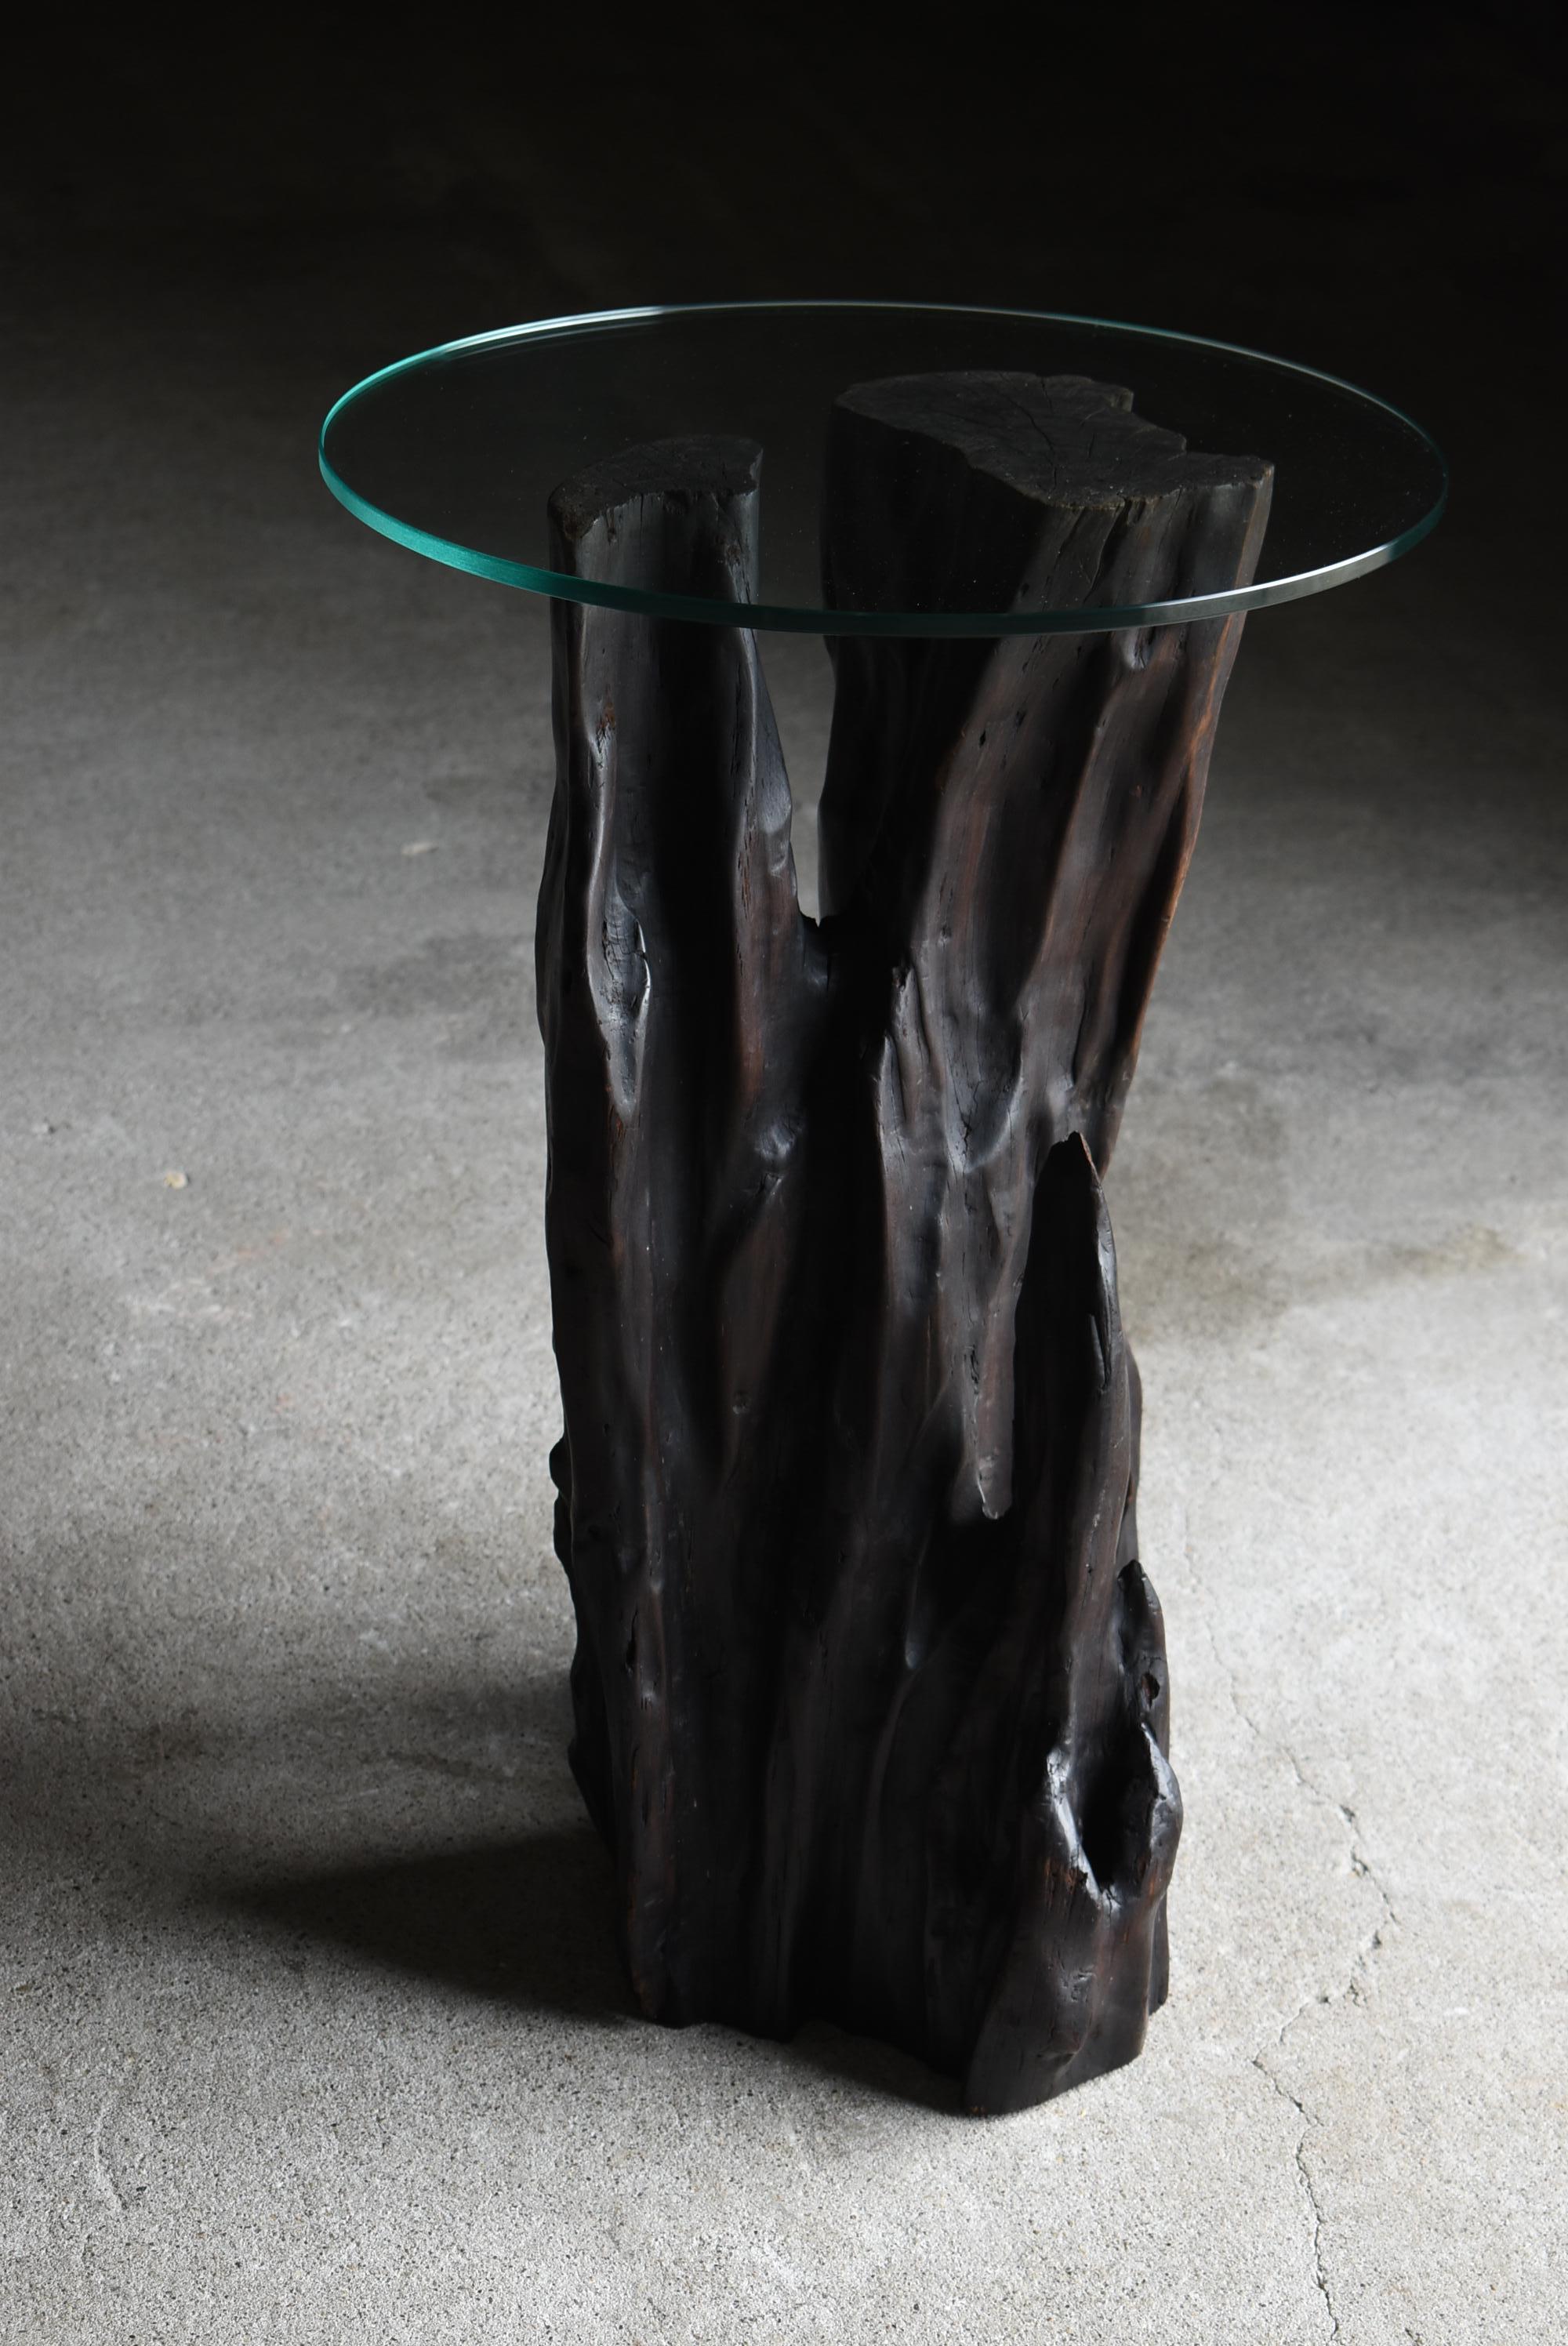 20th Century Japanese Antique Tree Root Side Table 1860s-1920s / Primitive Wabi Sabi For Sale